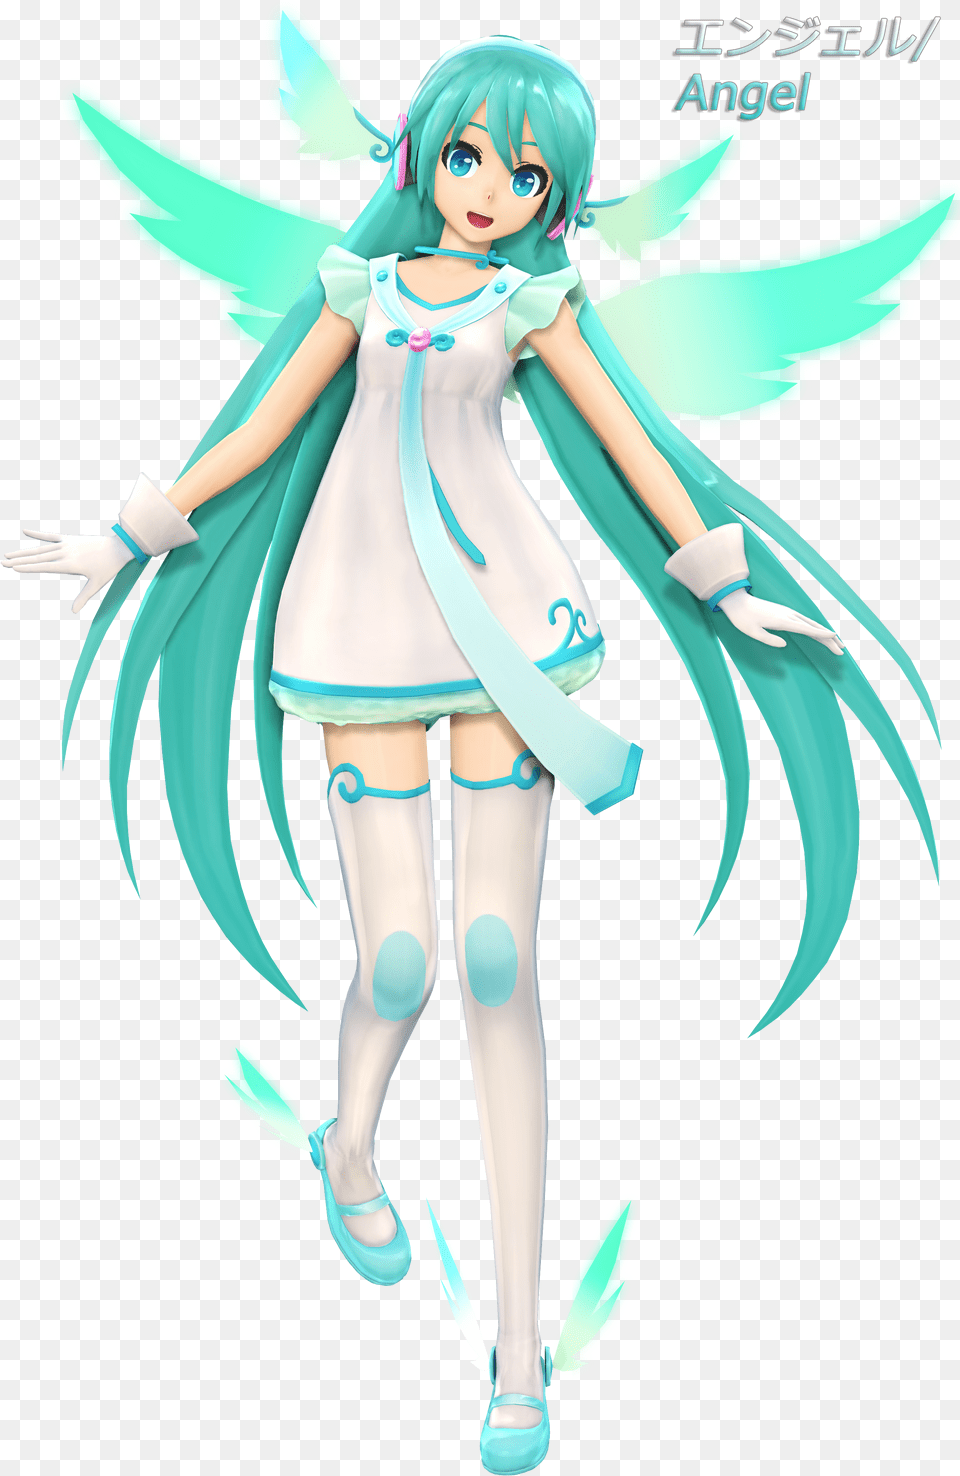 Transparent Anime Angel Hatsune Miku Angel Outfit Png Image